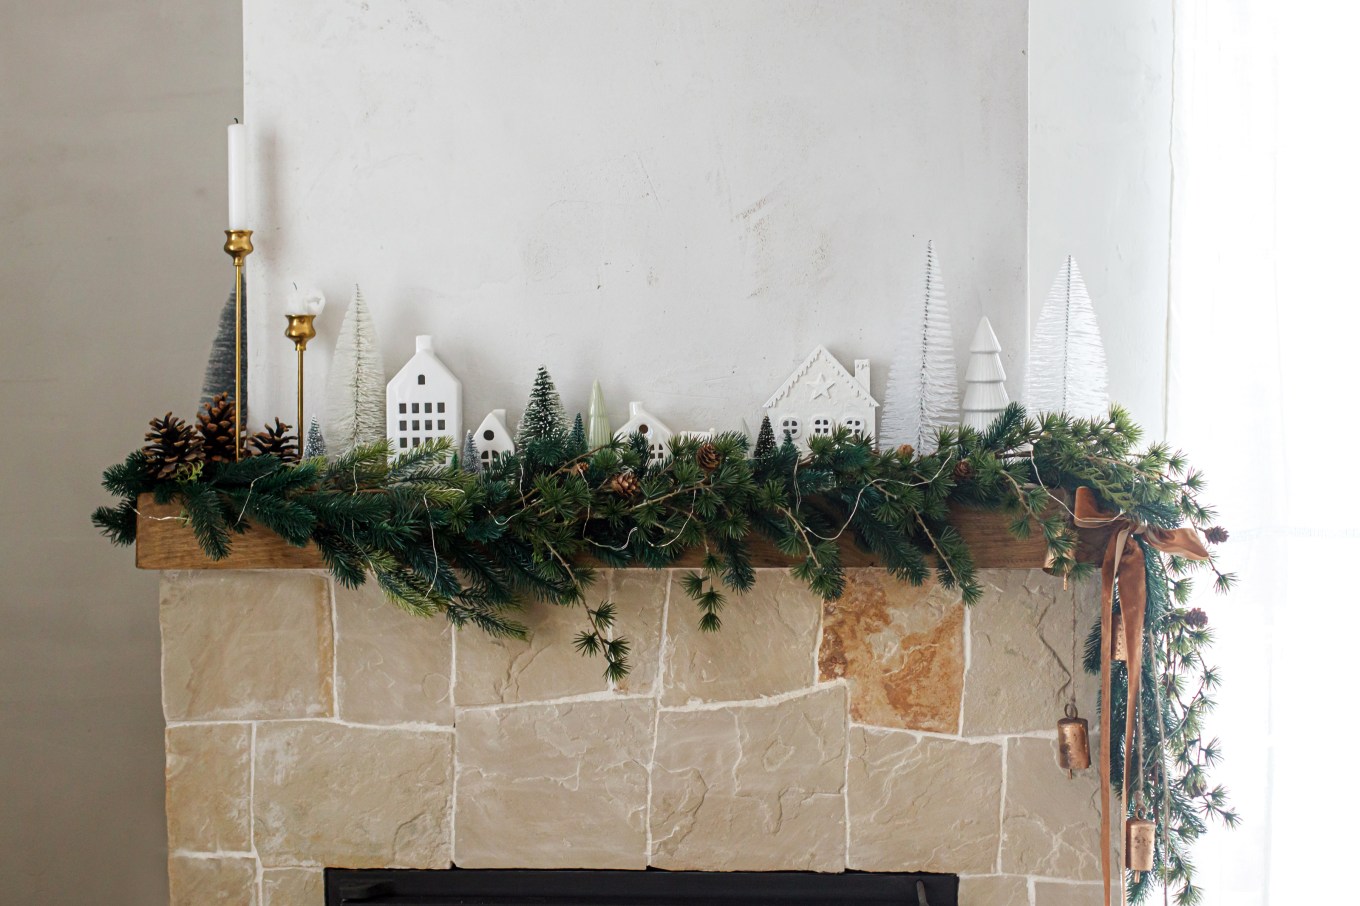 Stylish, modern Christmas fireplace decorated in Scandinavian fashion with trees, houses, pine cones and spruce branches on the mantle.